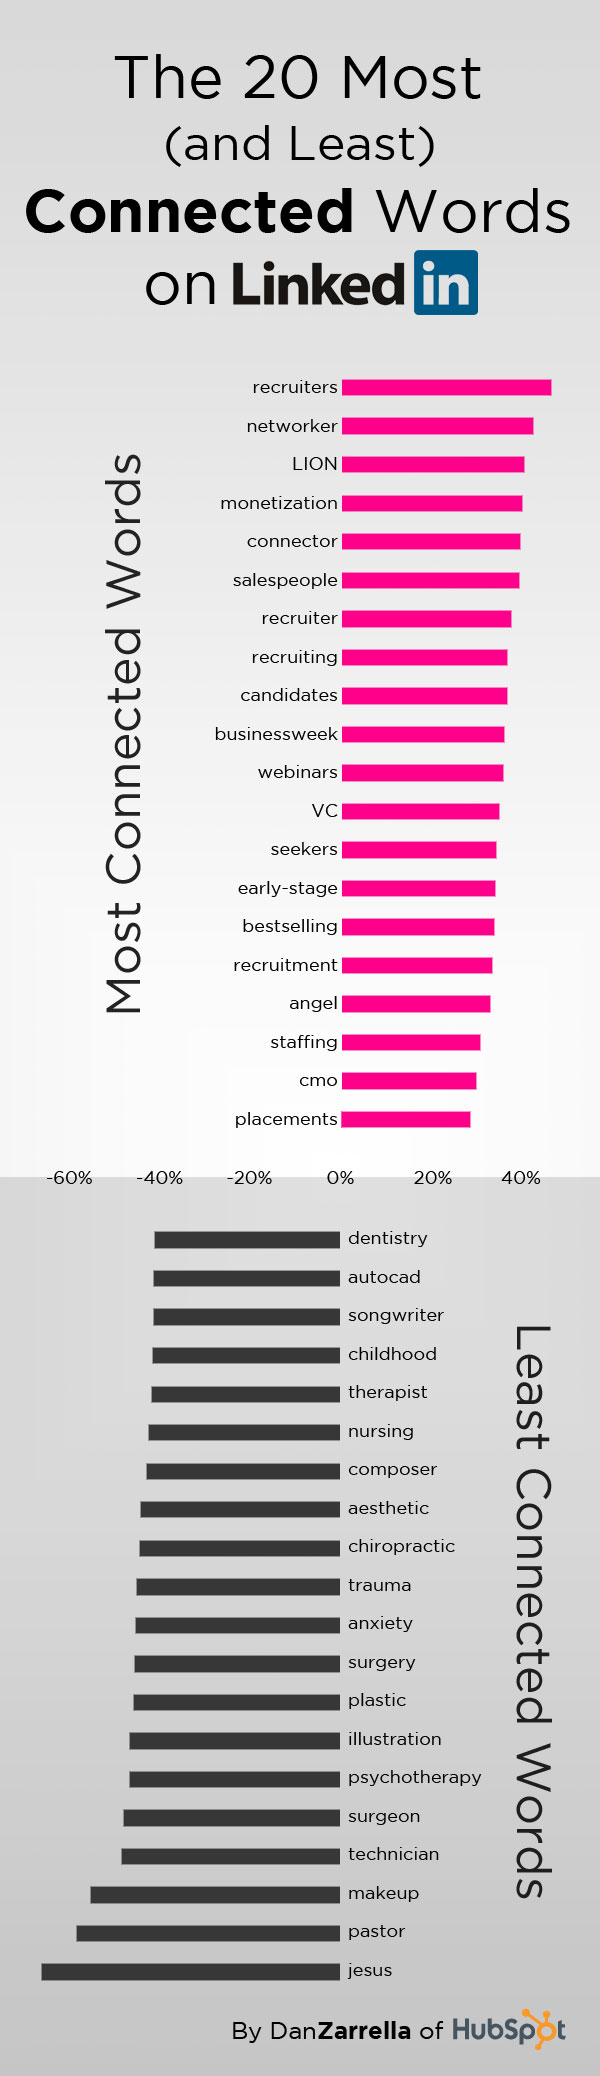 20 Most Connected Words on LinkedIn